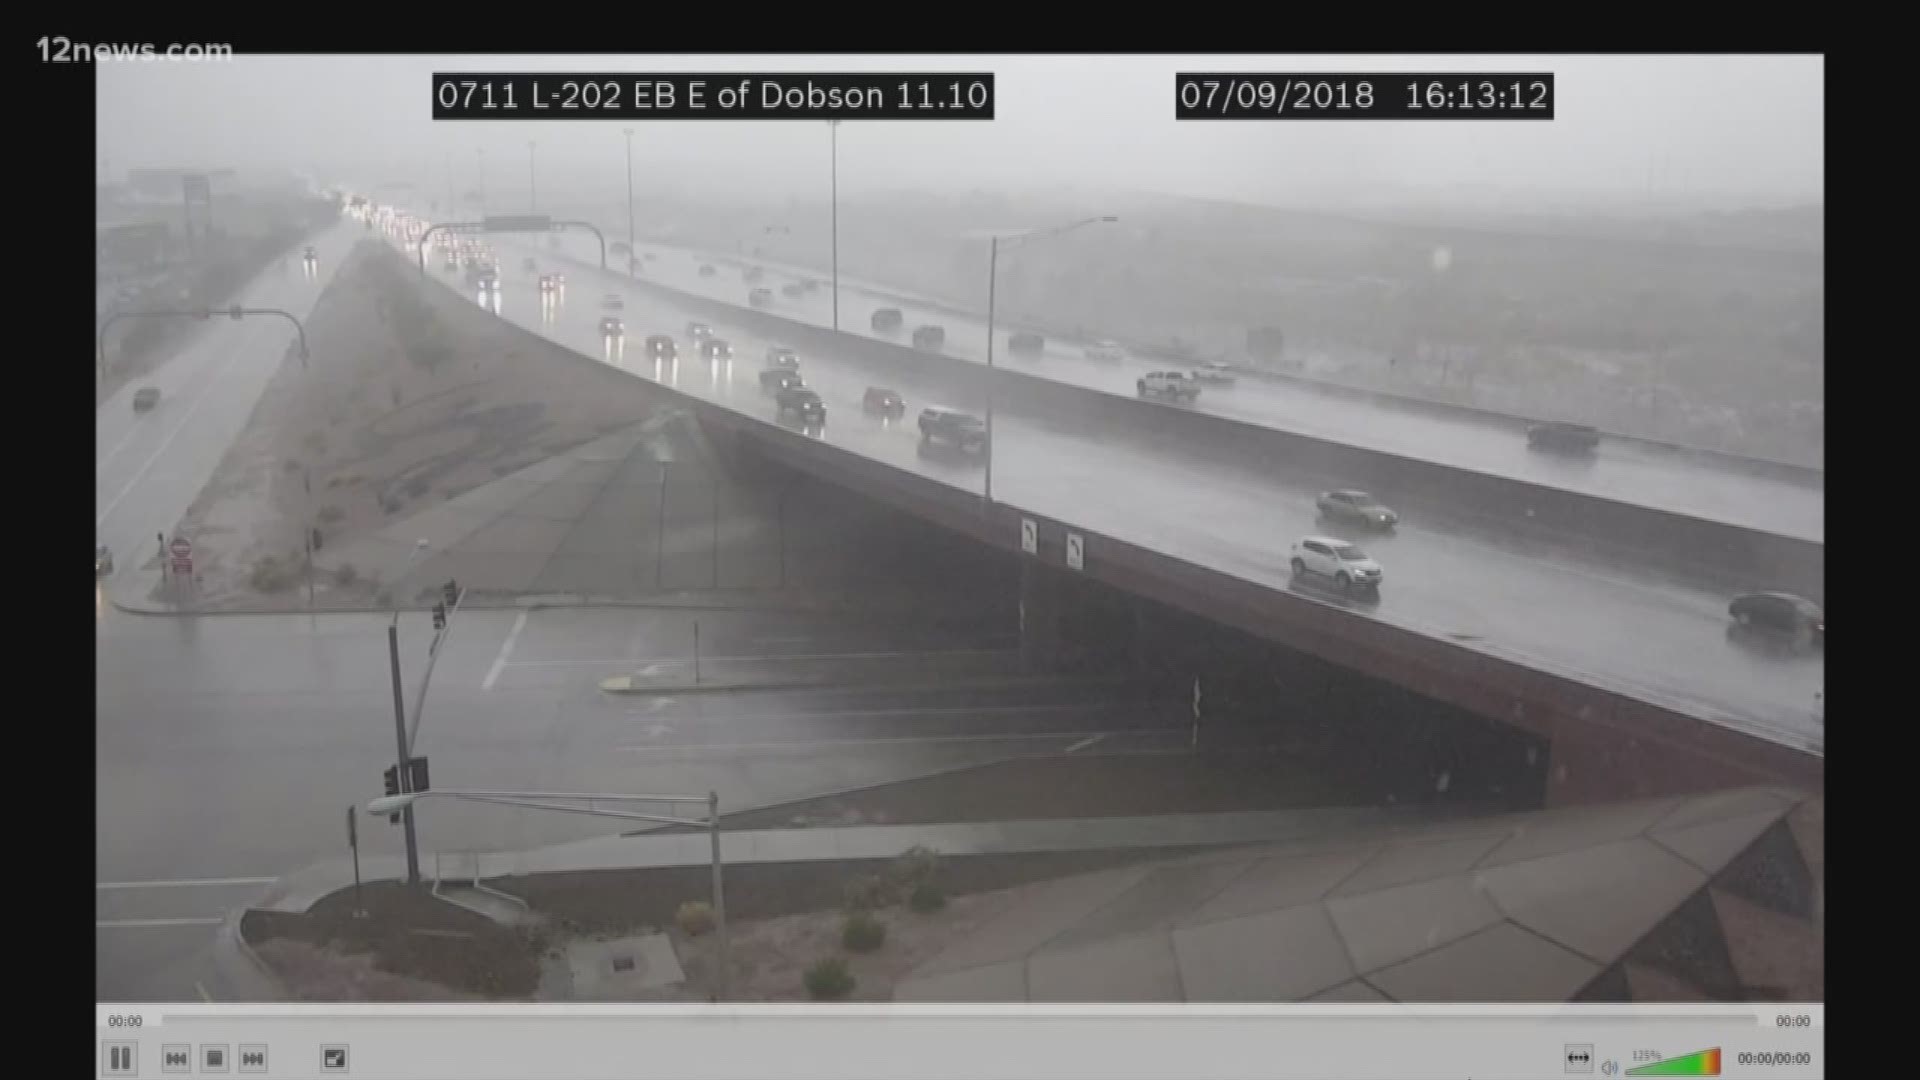 It's rush hour and ADOT is monitoring the roads for you. Watch for tips and updates on current road conditions.